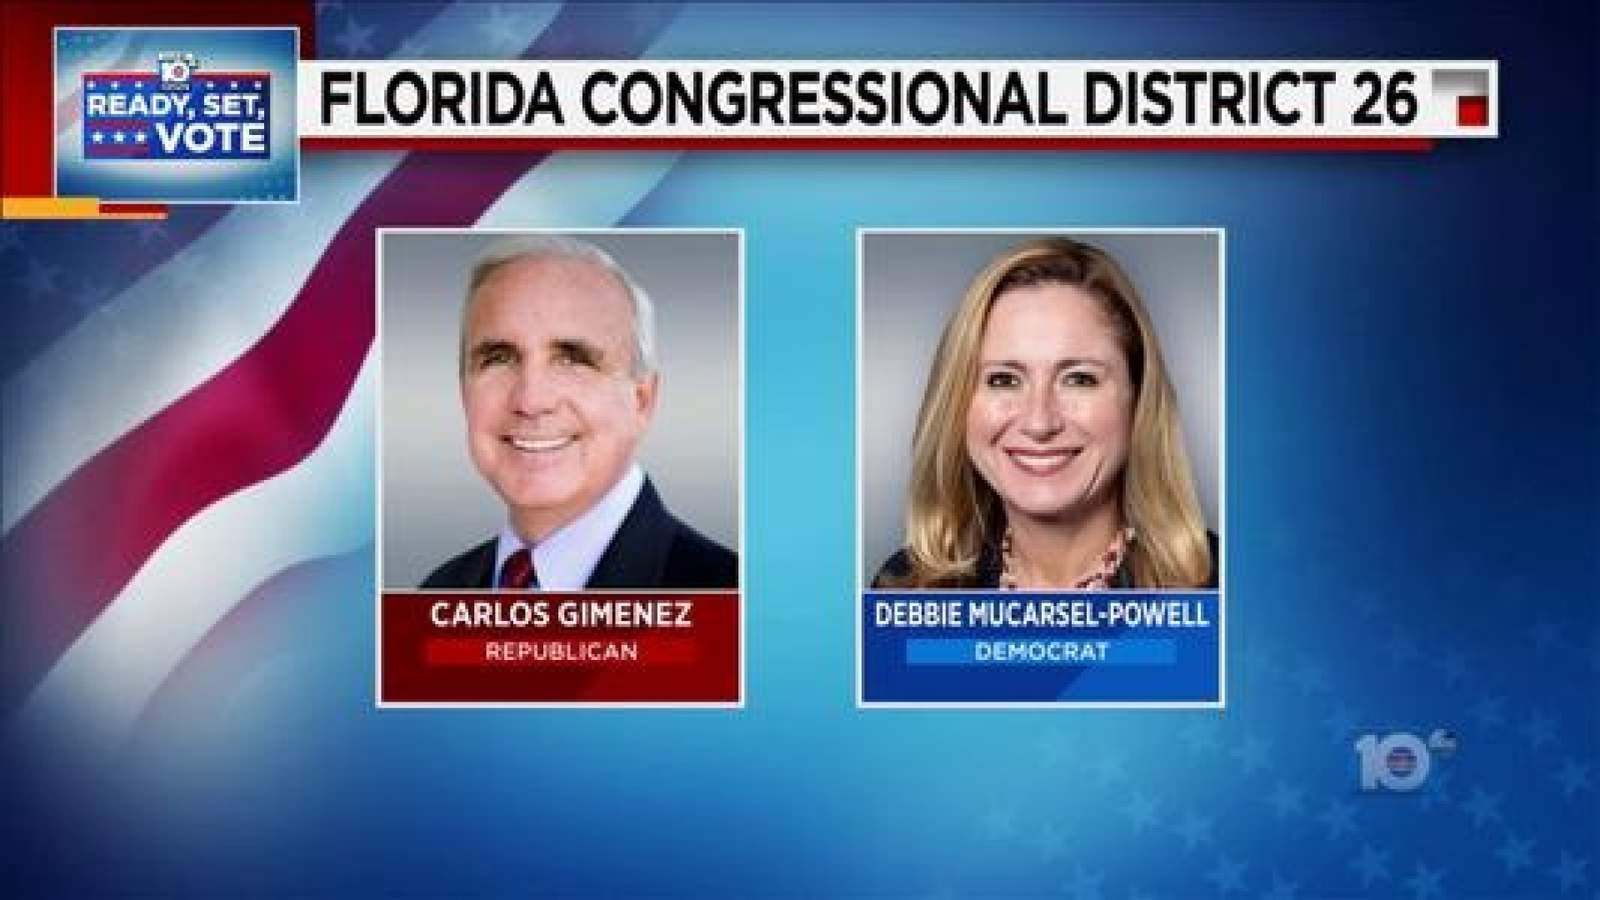 Candidates in important South Florida congressional race say they are ‘optimistic’ for win